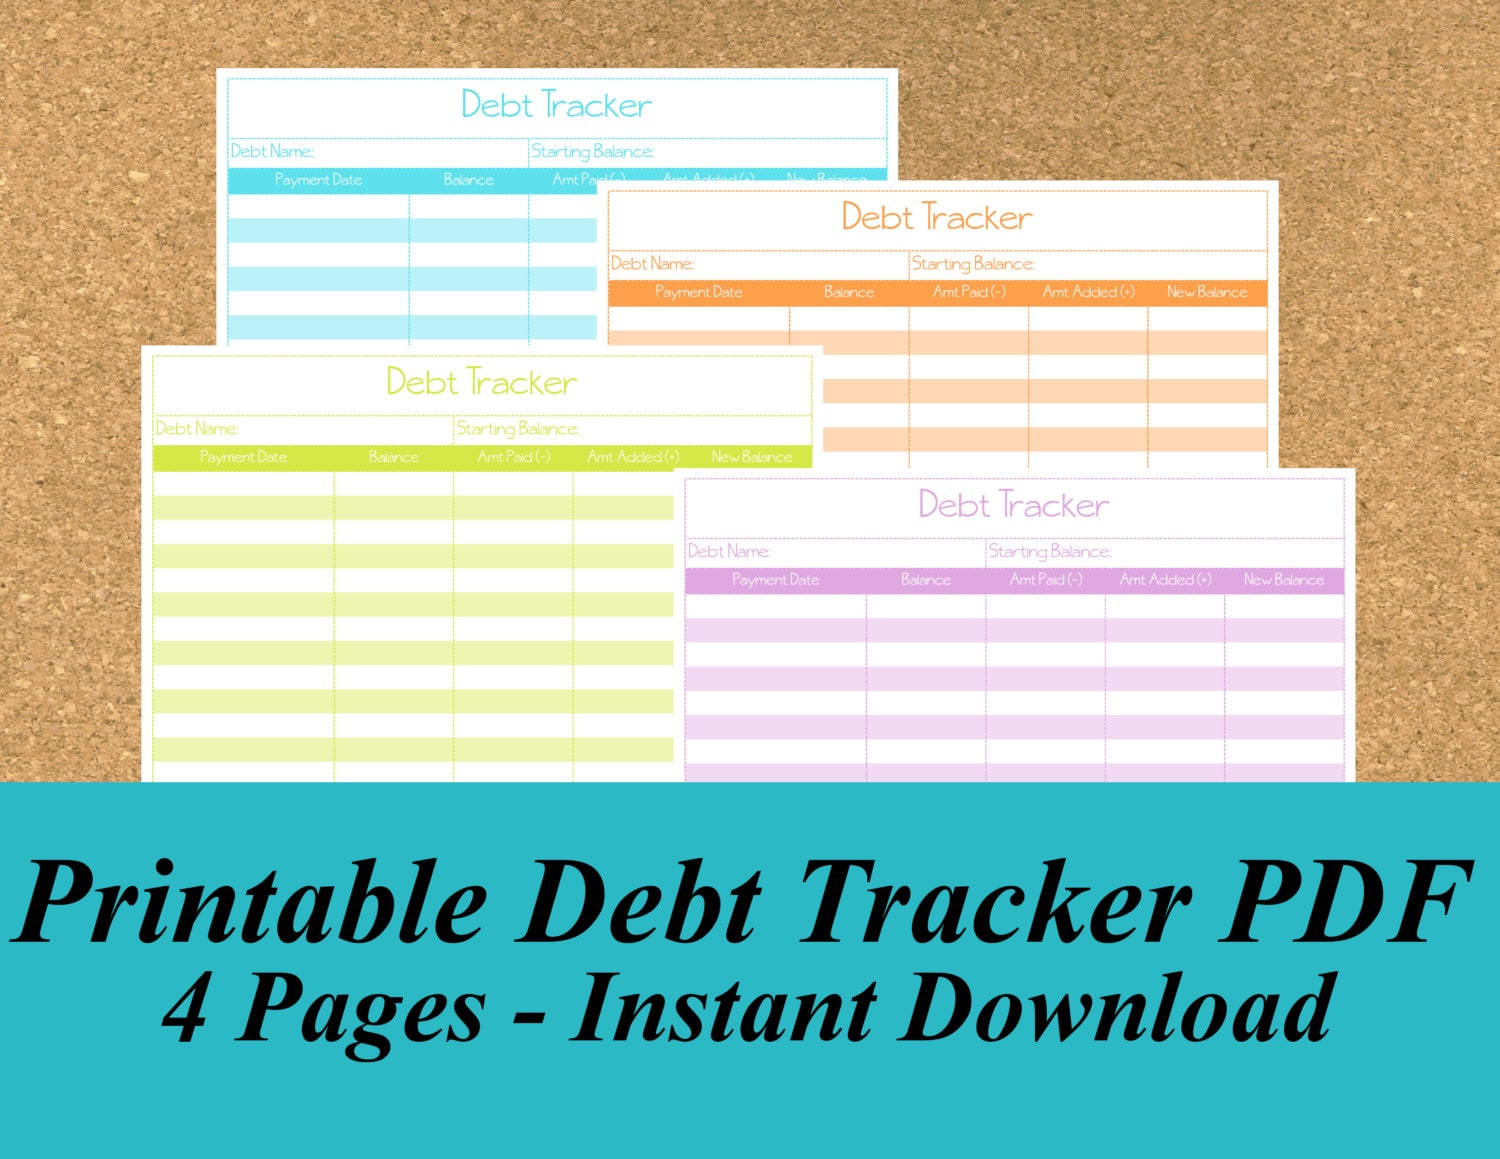 INSTANT DOWNLOAD Printable Debt Tracker PDF 4 Pages